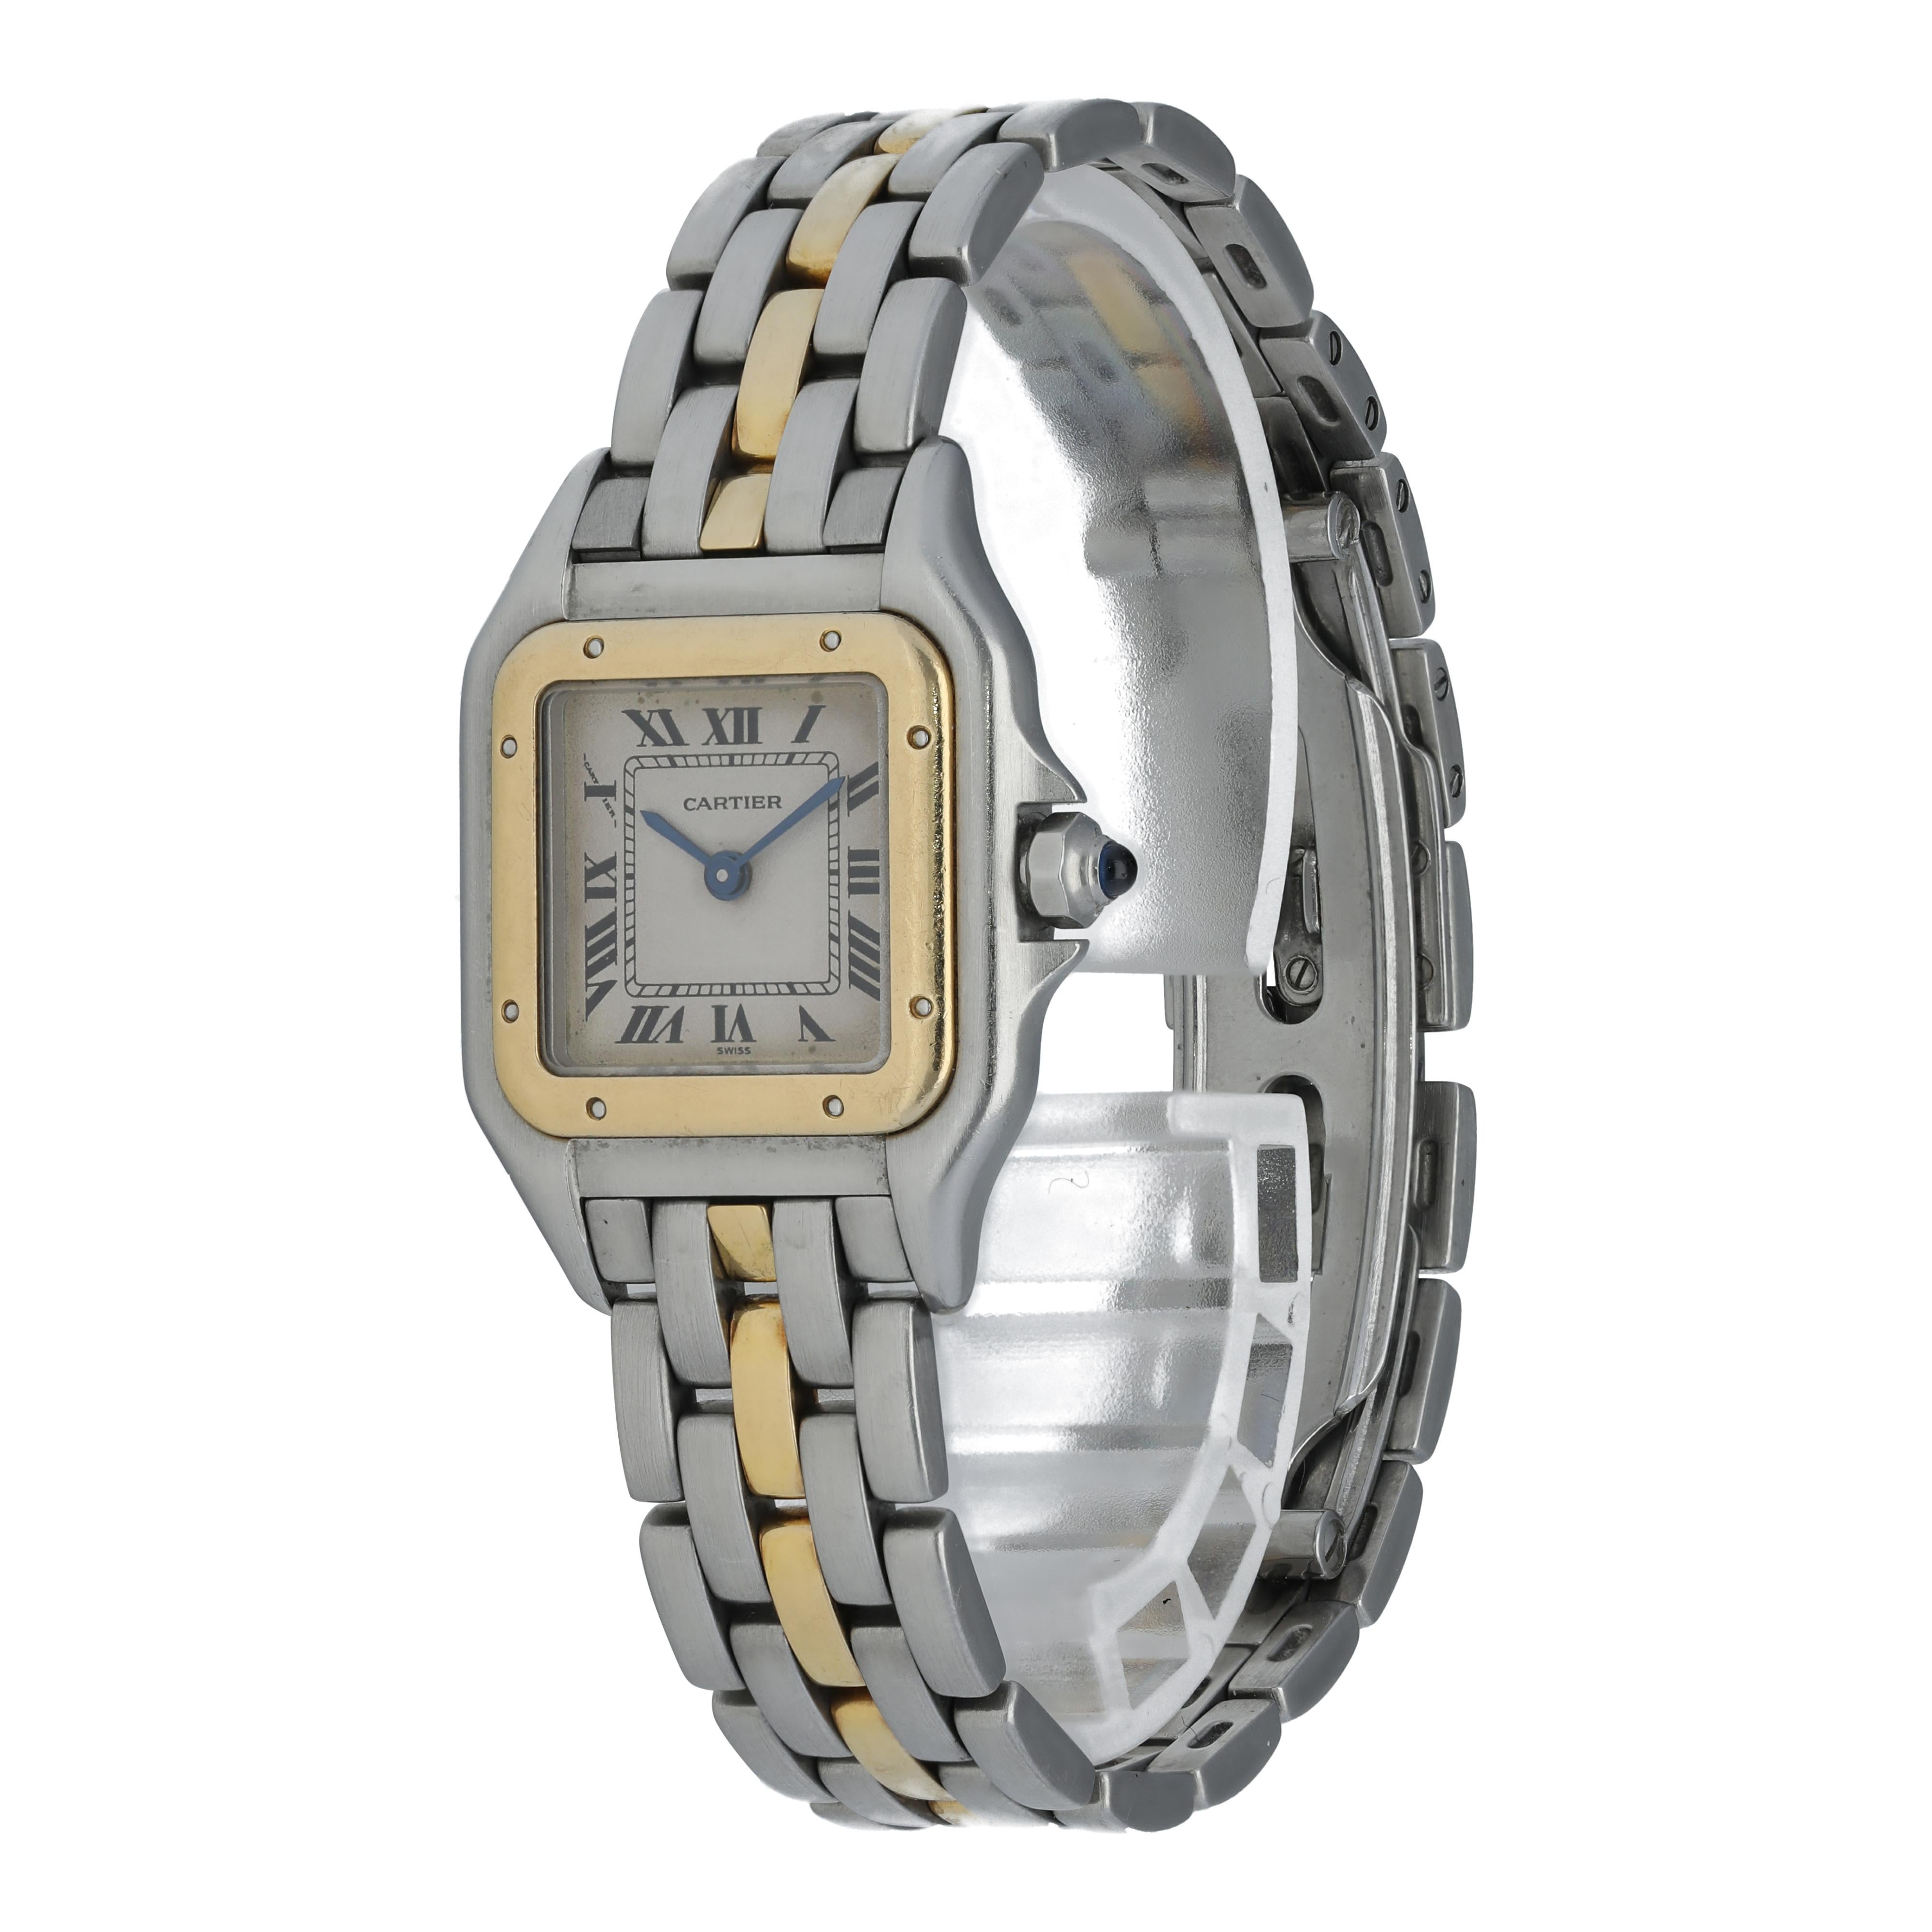 Cartier Panthere 1120 Ladies Watch.
23mm Stainless Steel case. 
Yellow Gold Stationary bezel. 
Off-White dial with Blue steel hands and Roman numeral hour markers. 
Minute markers on the inner dial. 
Stainless Steel Bracelet with Butterfly Clasp.